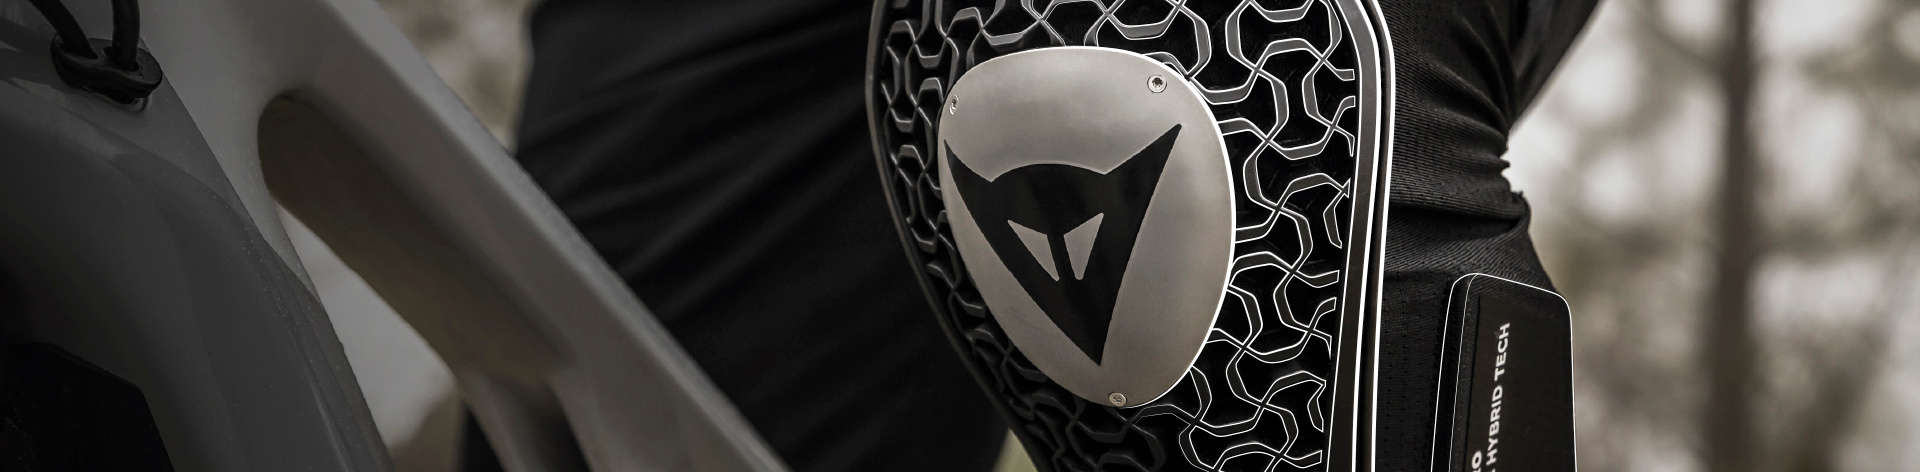 Dainese Bike protections